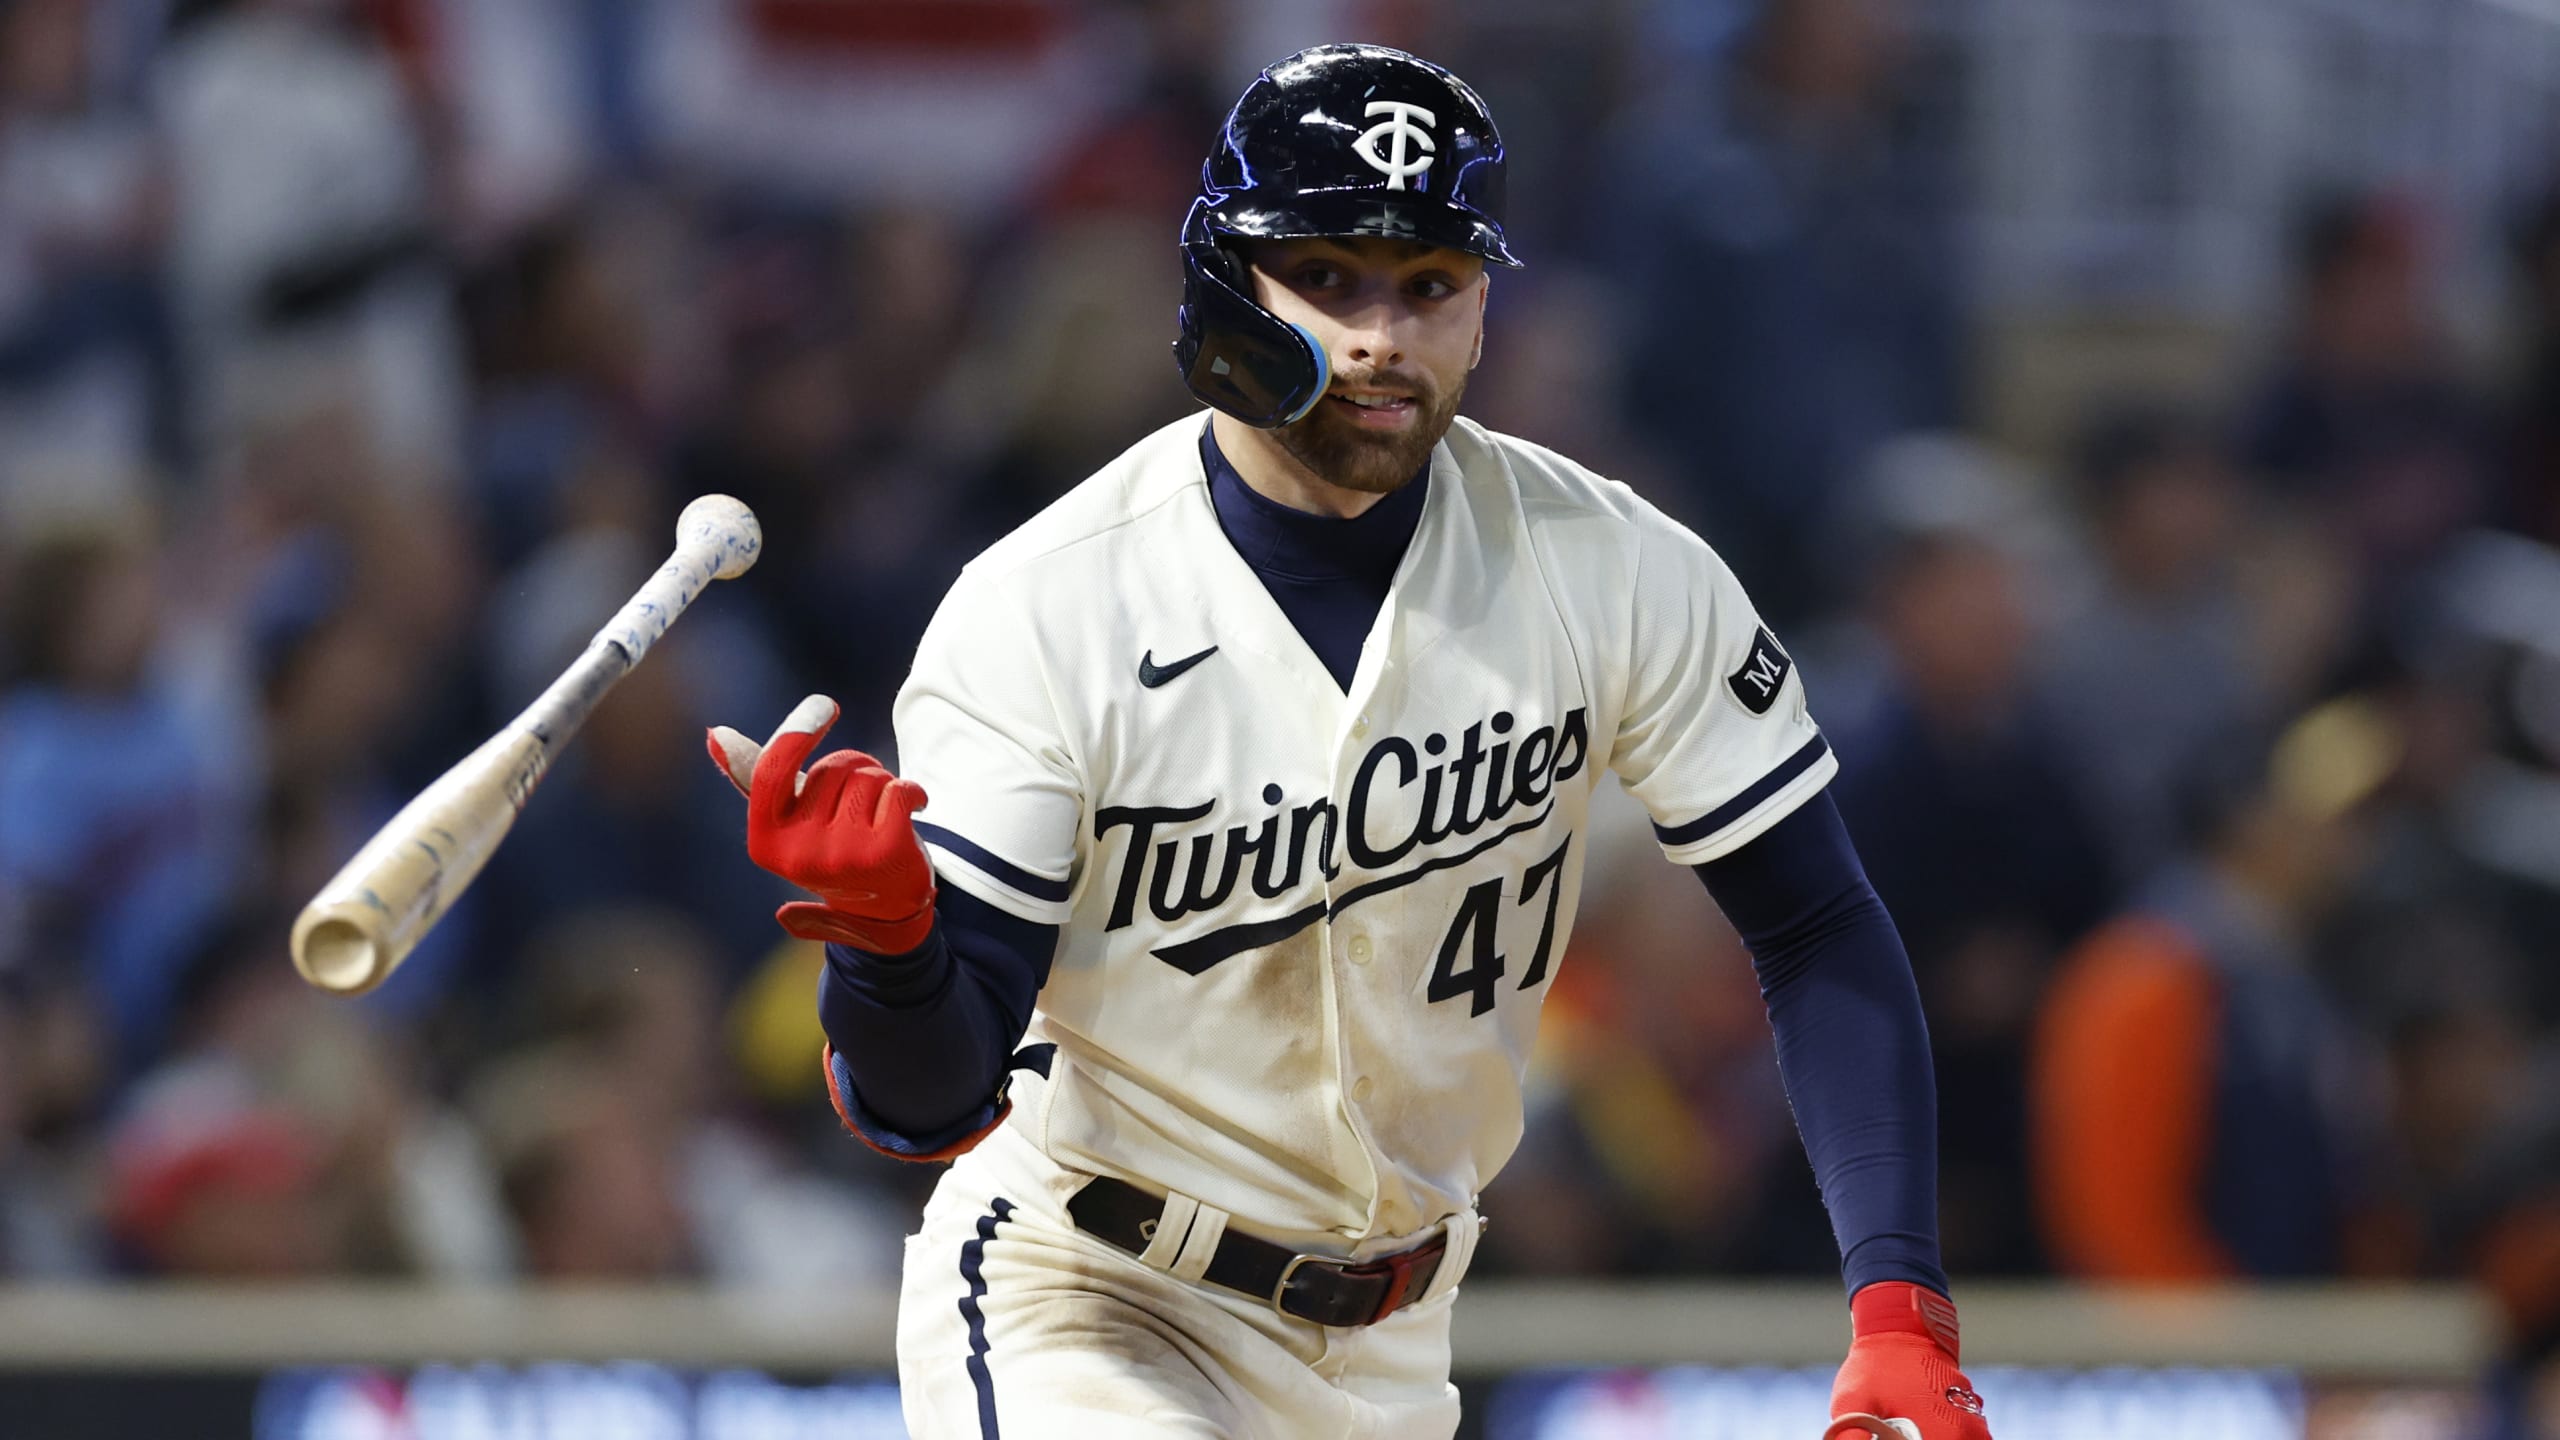 Bullpen and offense falter again, Padres fall to Twins 7-4